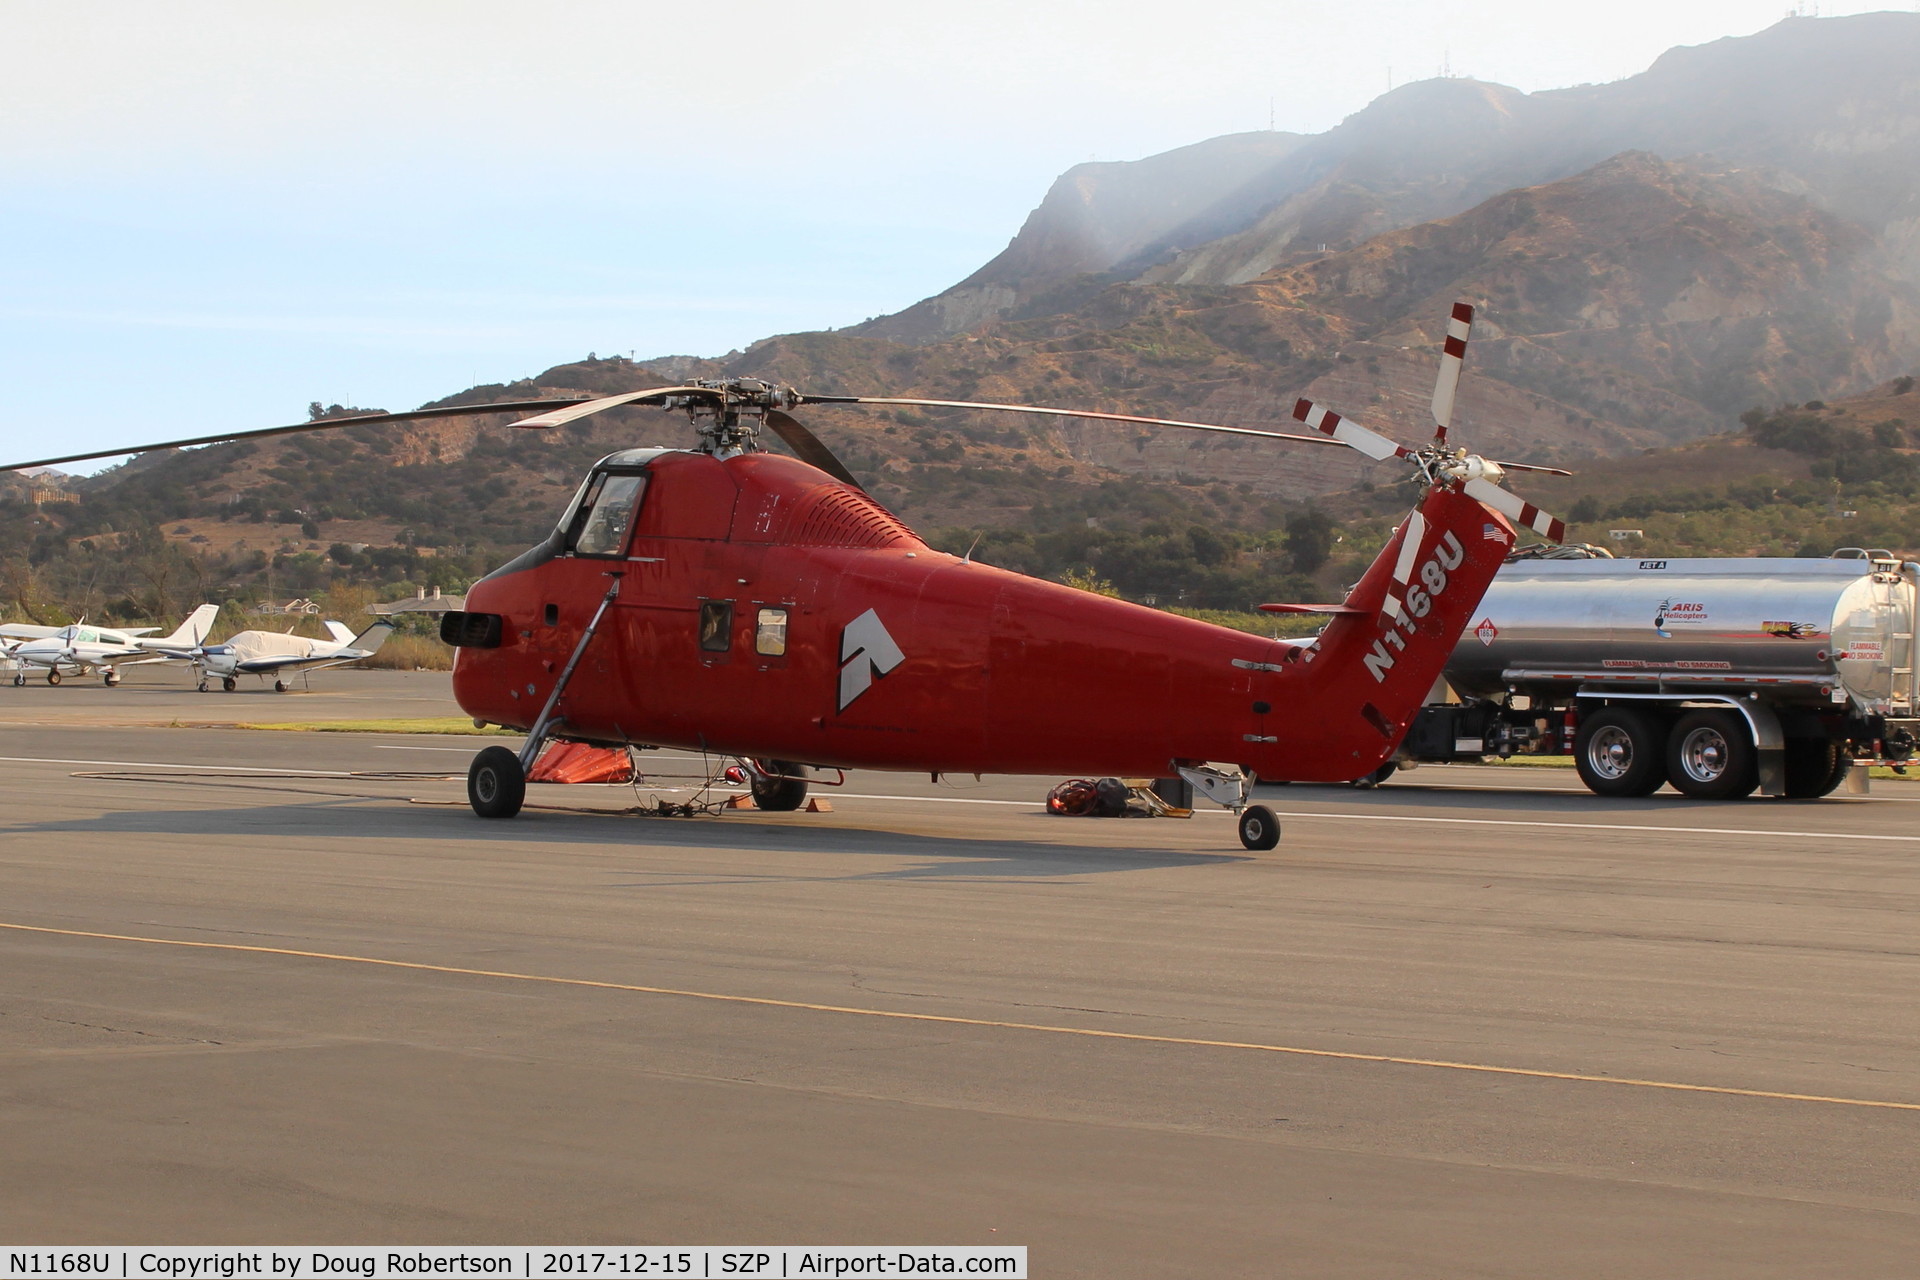 N1168U, 1958 Sikorsky S-58ET C/N 58-1070, N1168U 1958 Sikorsky S-58ET, P&W(C)PT6 Twin Pac Turboshaft 1,800 SHp upgrade. One of the older FireBombers at the SZP FireBase. At 59 years, probably older than its pilot crew.